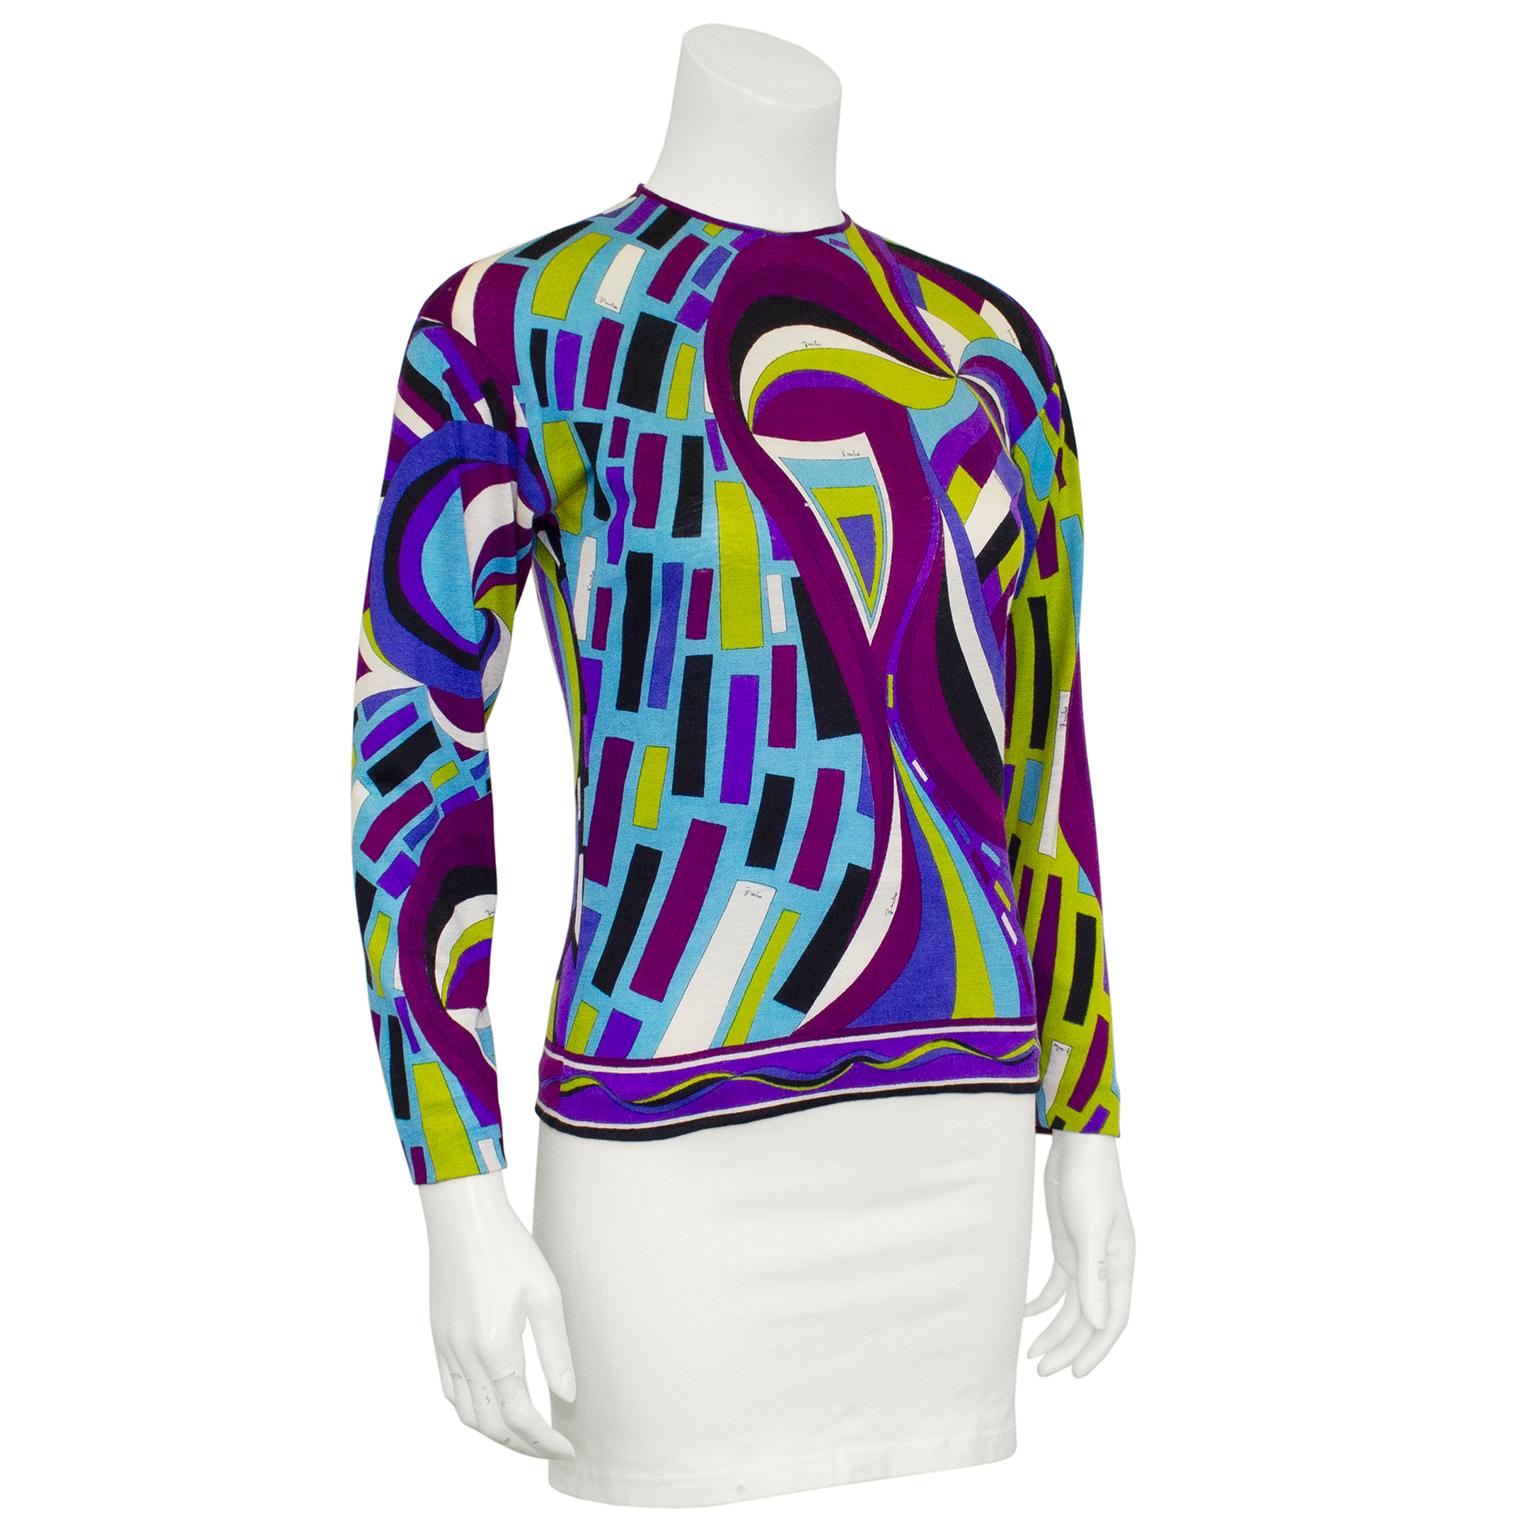 Beautiful Emilio Pucci very light weight pull over sweater from the 1970s. Made from a 90% cashmere, 10% silk blend, this sweater features the iconic Emilio Pucci brand abstract print in tones of dark purple, blue and lime green. Crew neckline and